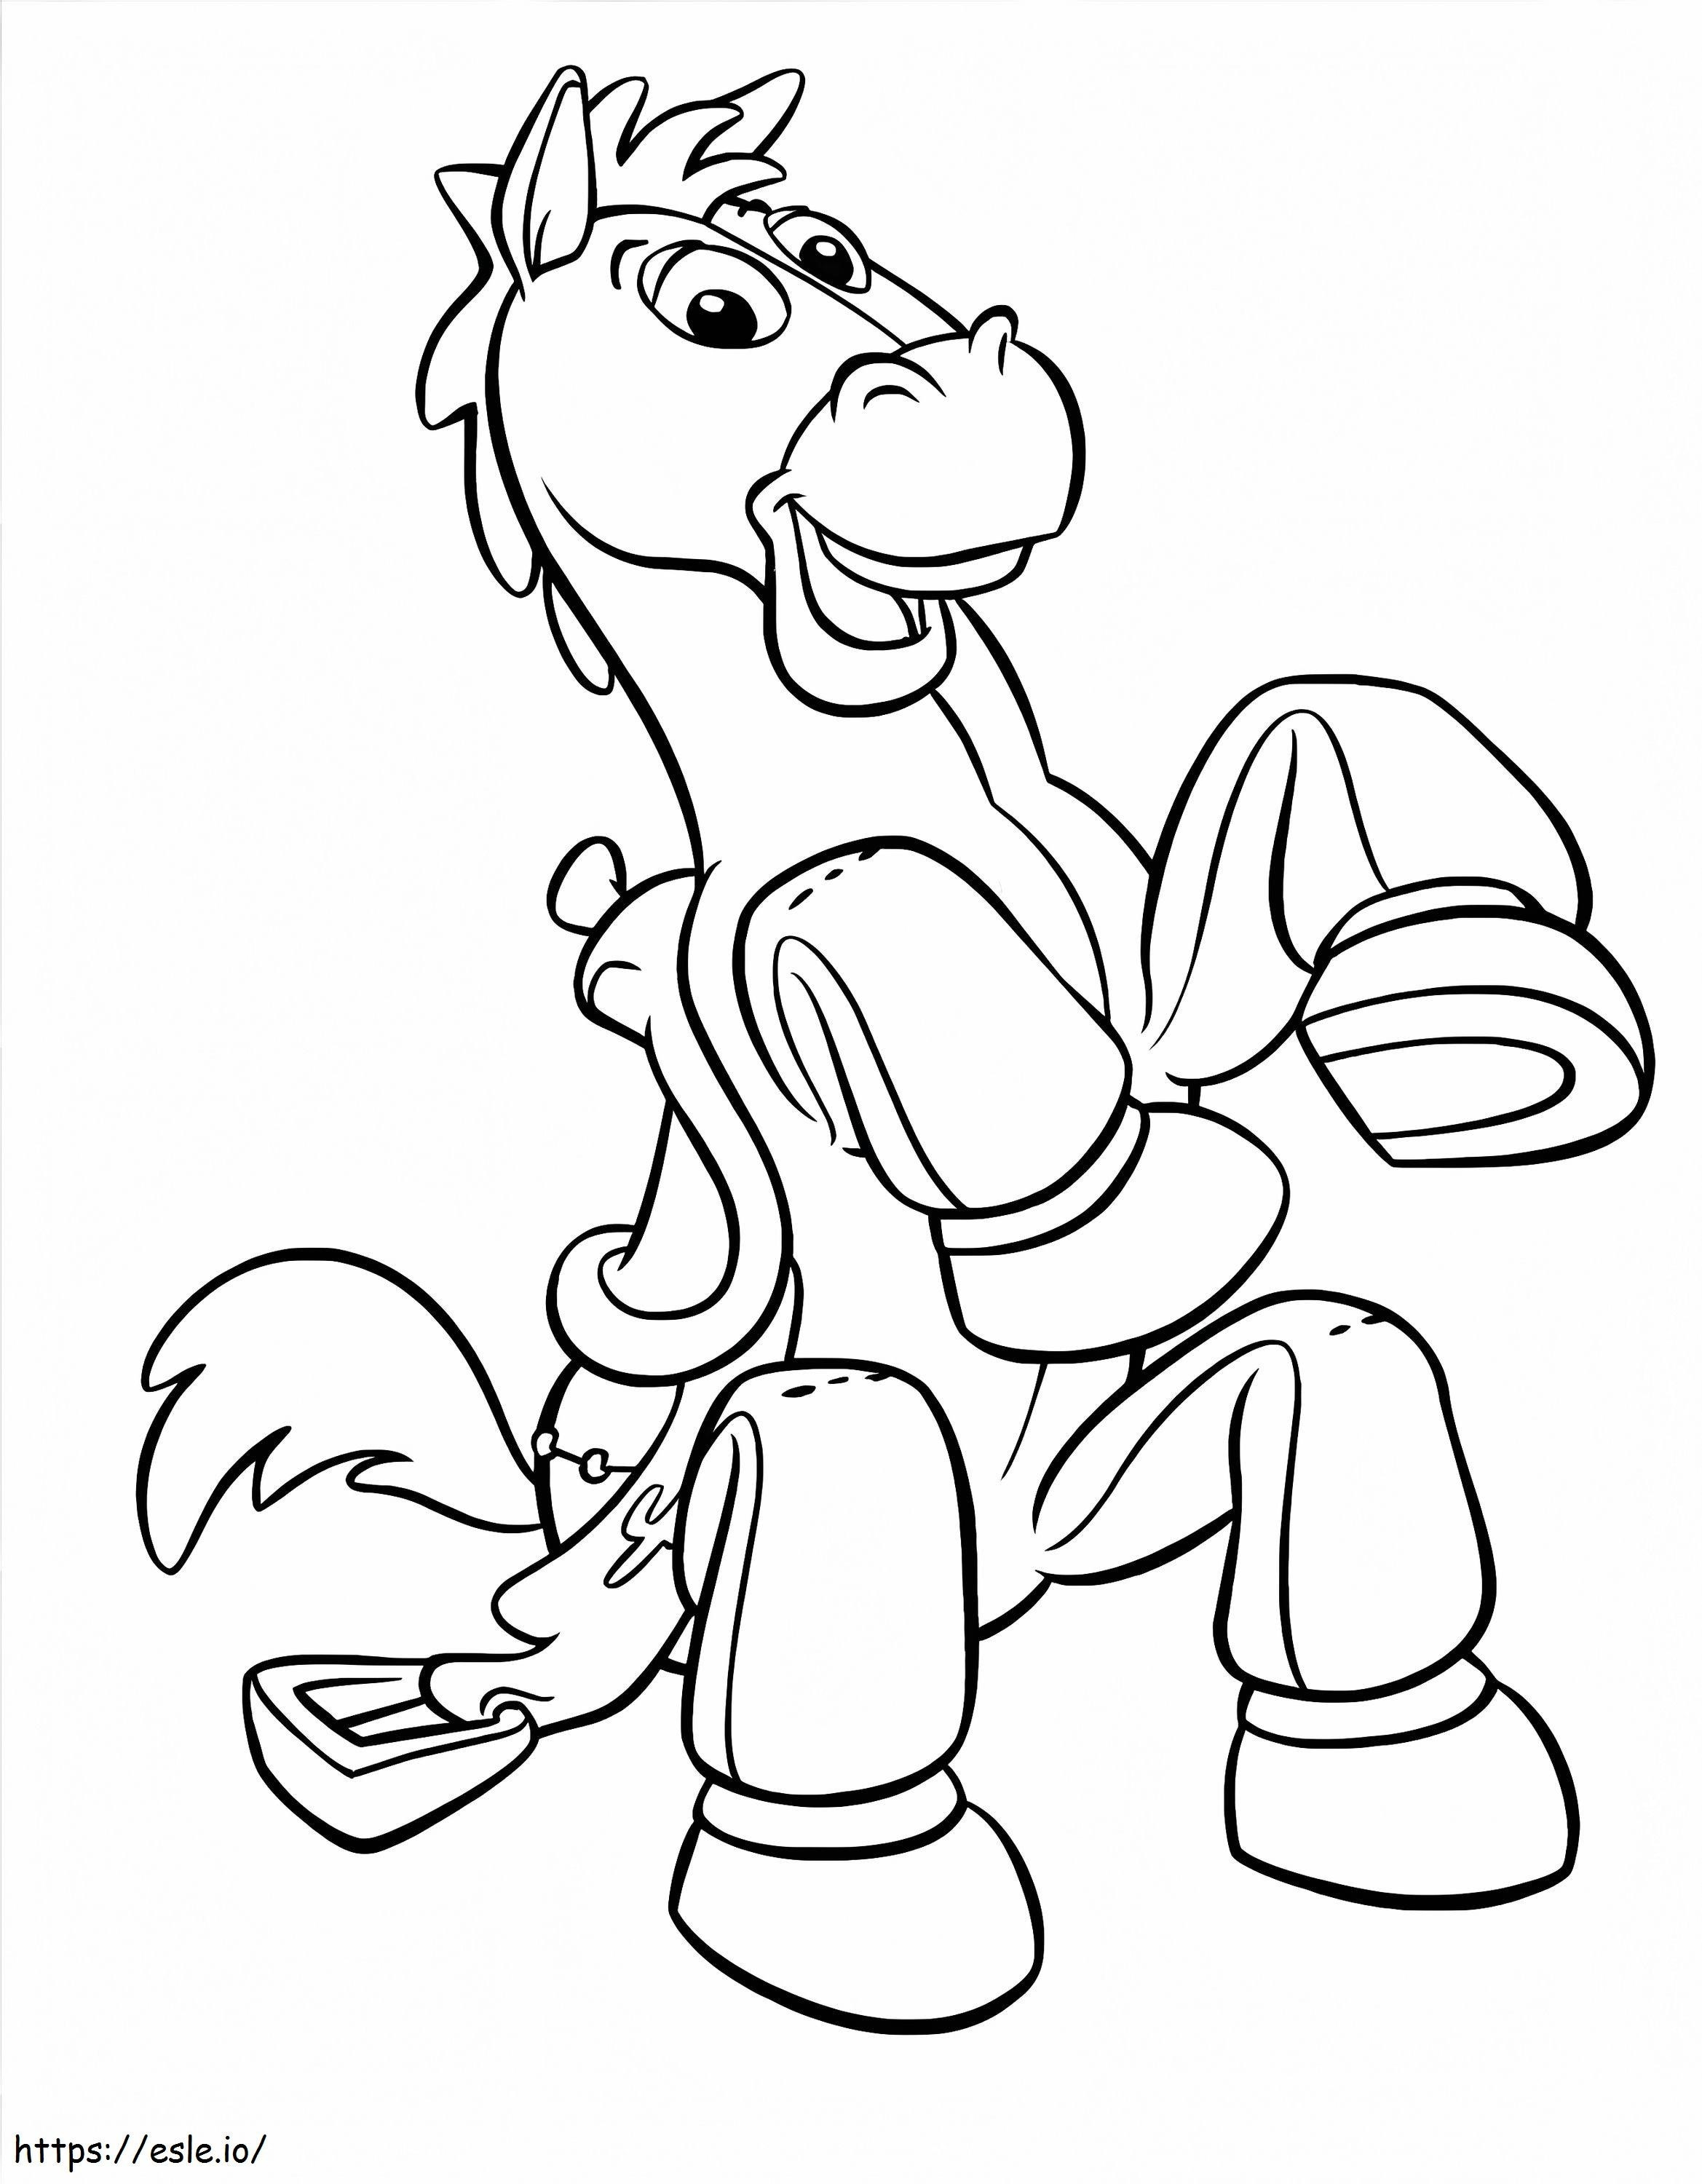 Toy Story Woody 2 1 coloring page